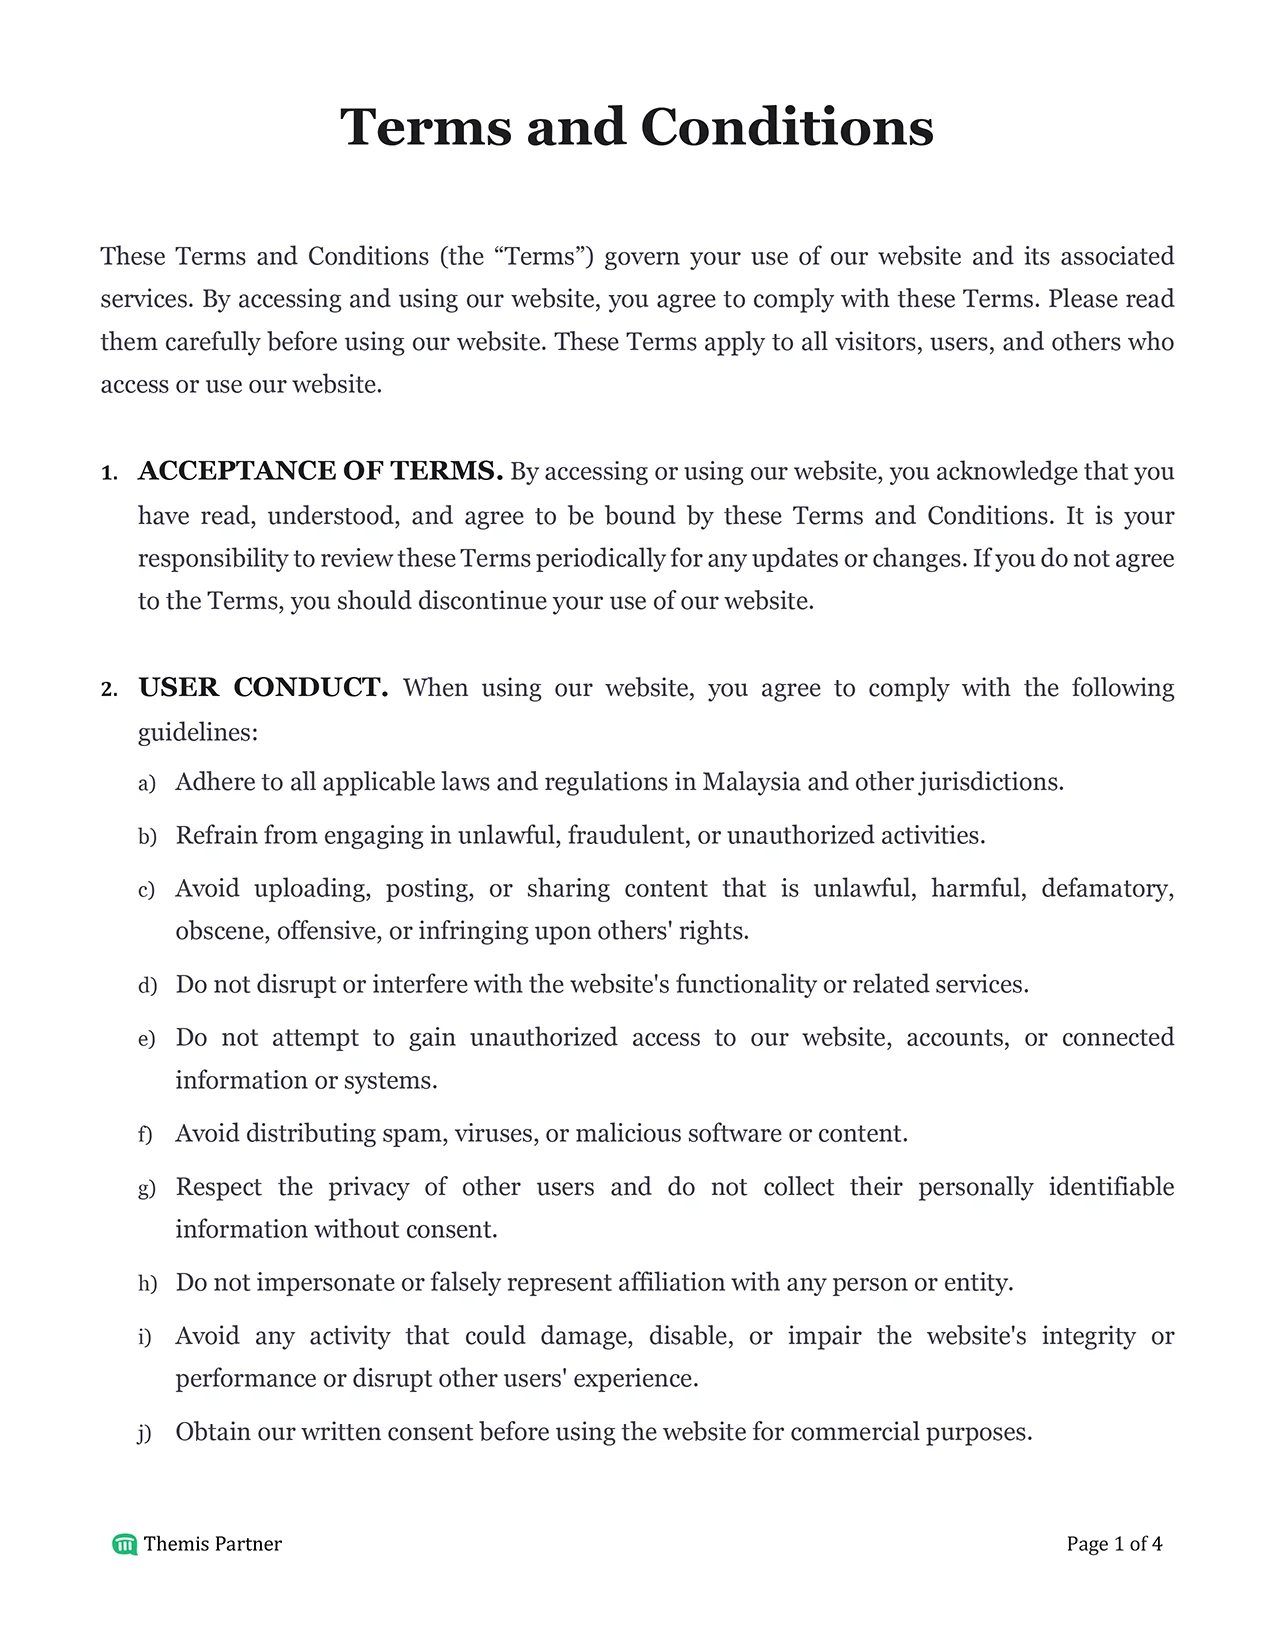 Terms and conditions Malaysia 1